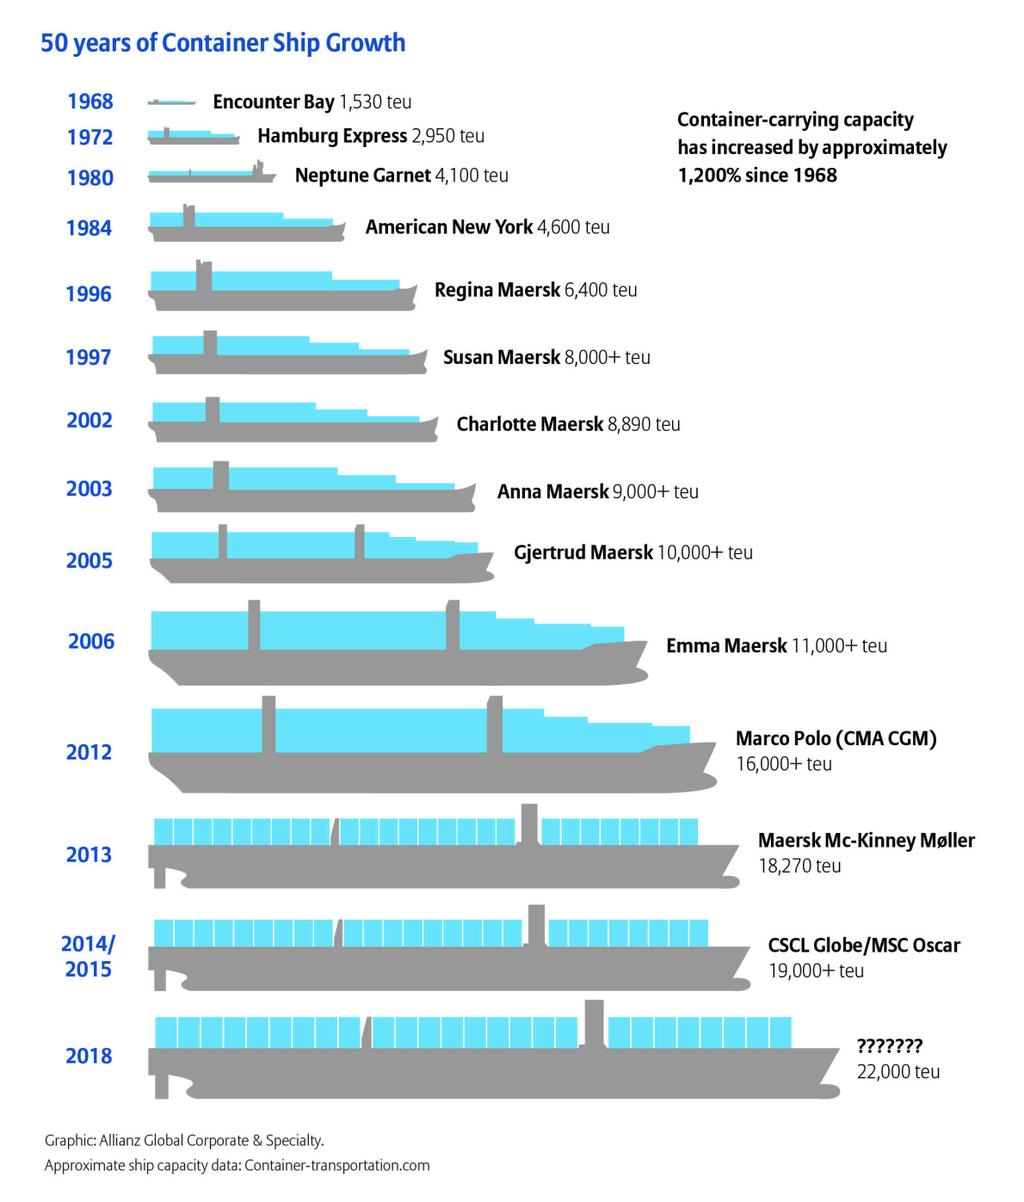 Source: World Shipping Council, About the Industry. Container Ship Design, 2017, <http://www.